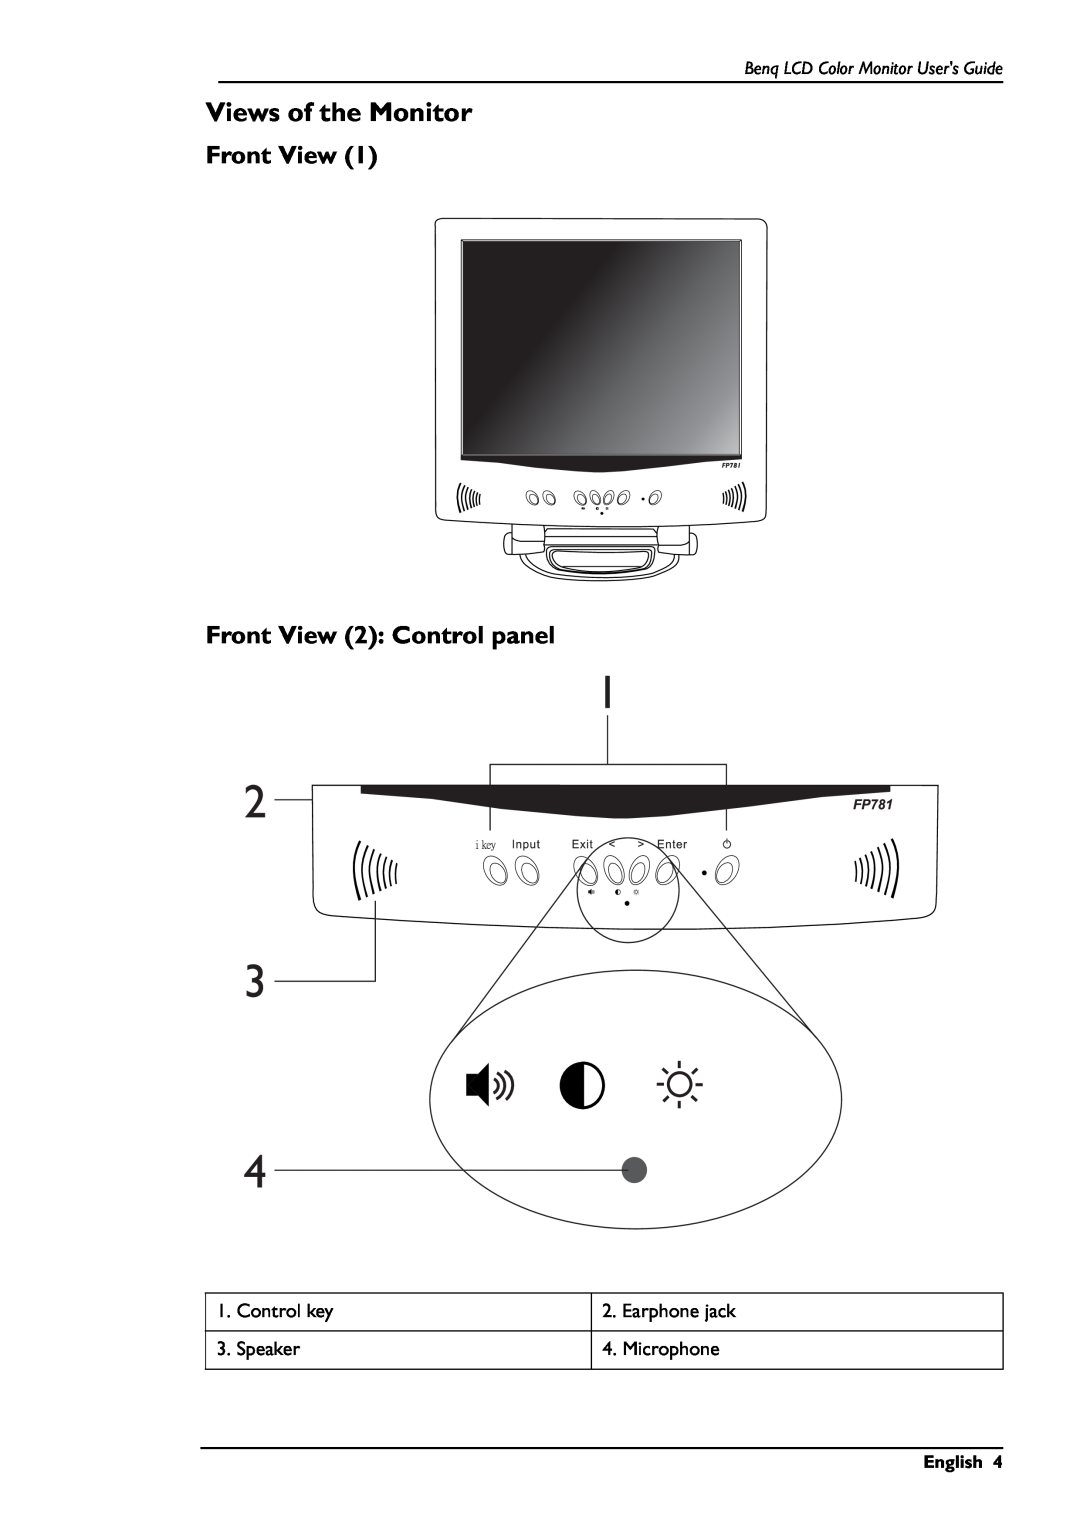 BenQ FP781 Views of the Monitor, Front View Front View 2 Control panel, Benq LCD Color Monitor Users Guide, English 